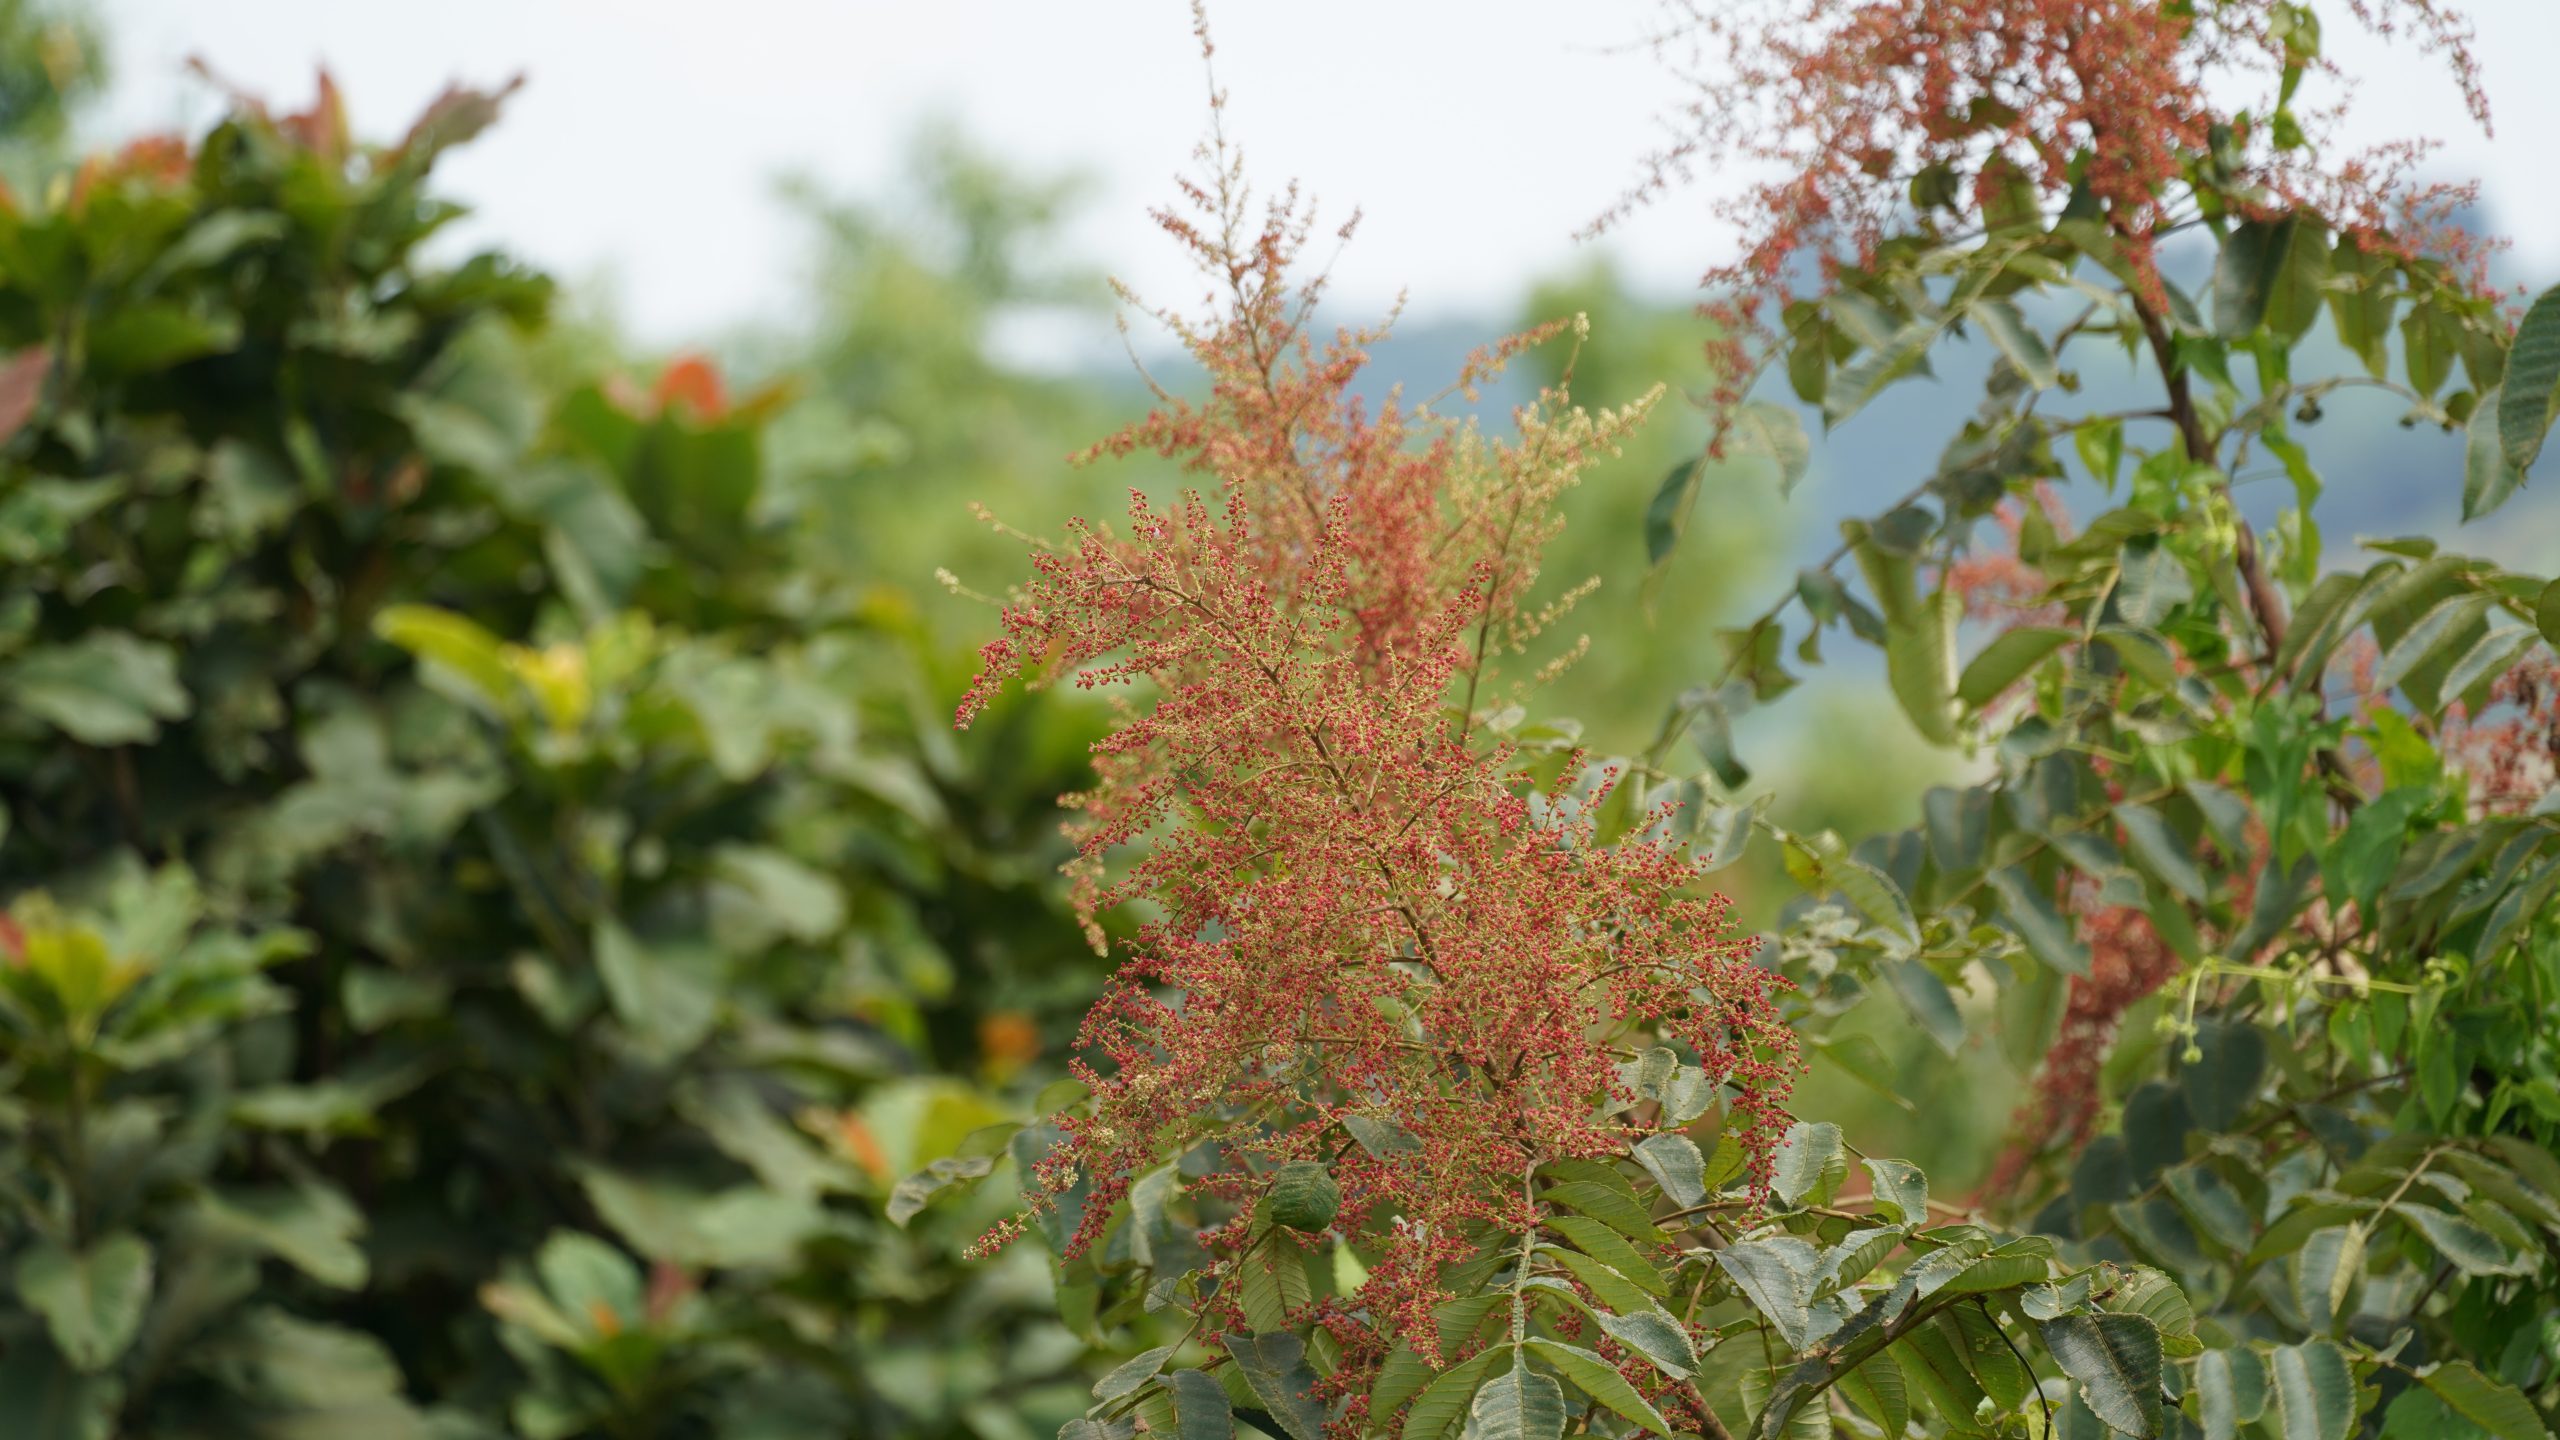 Chinese sumac herb potentially being used for tooth decay